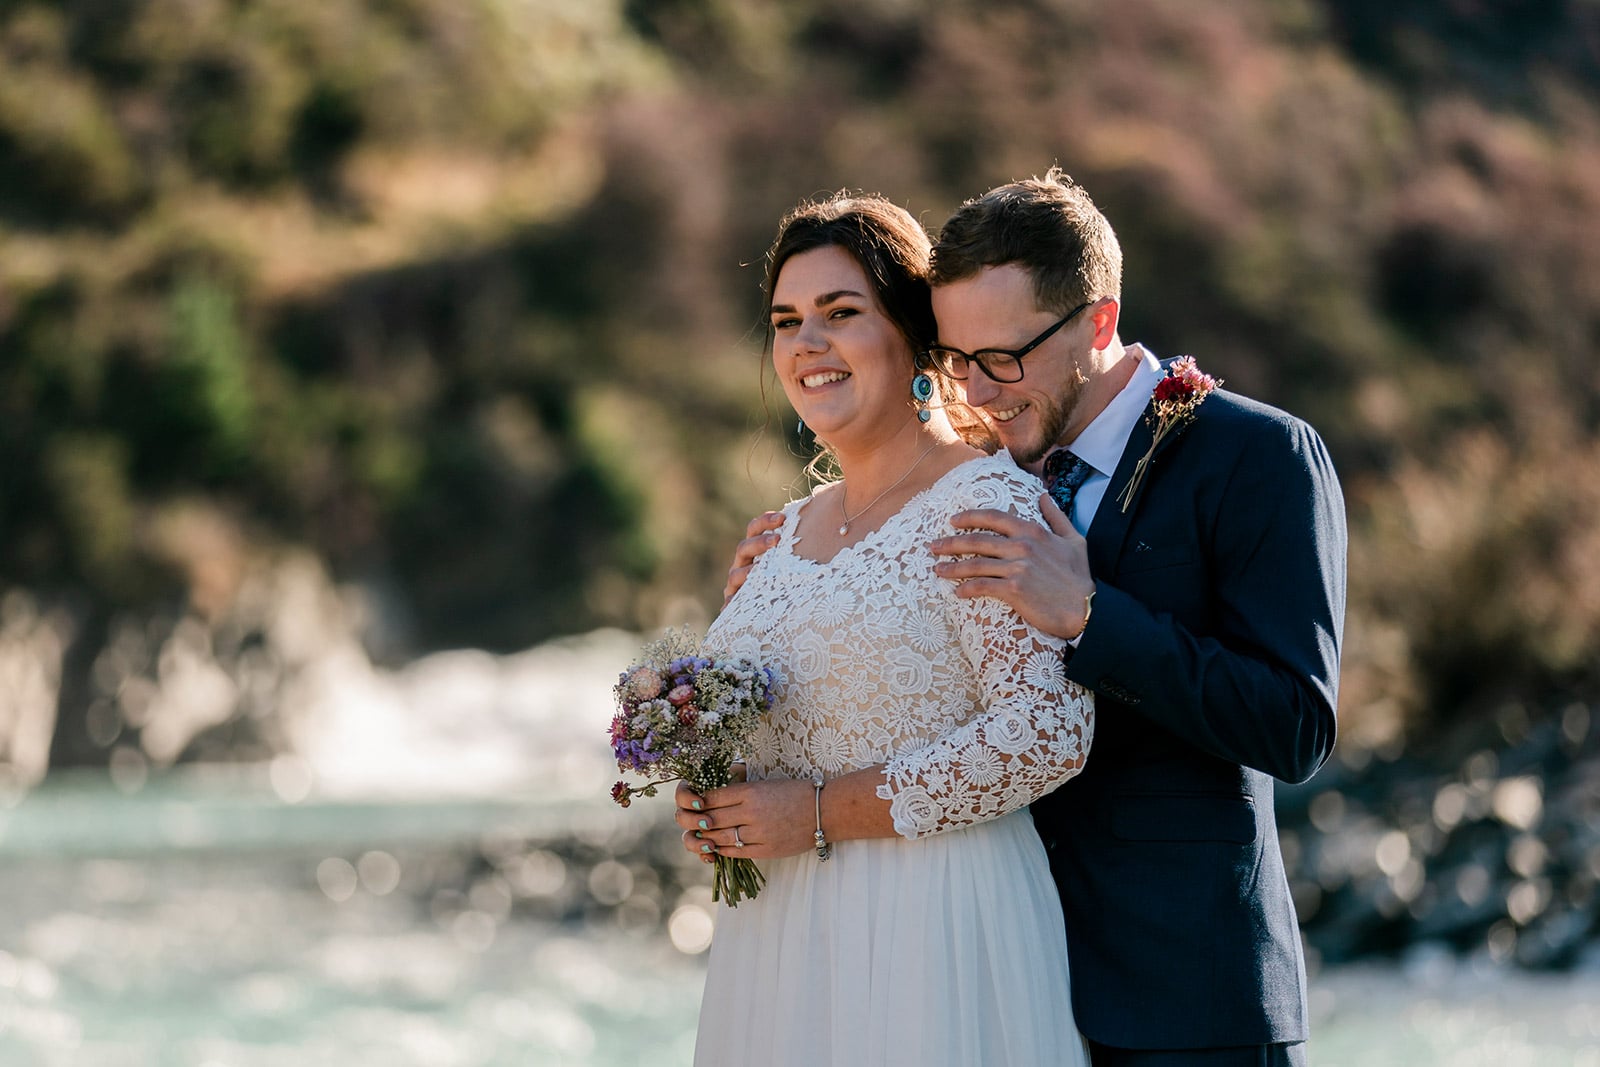 Wedding photos by the river in Queenstown